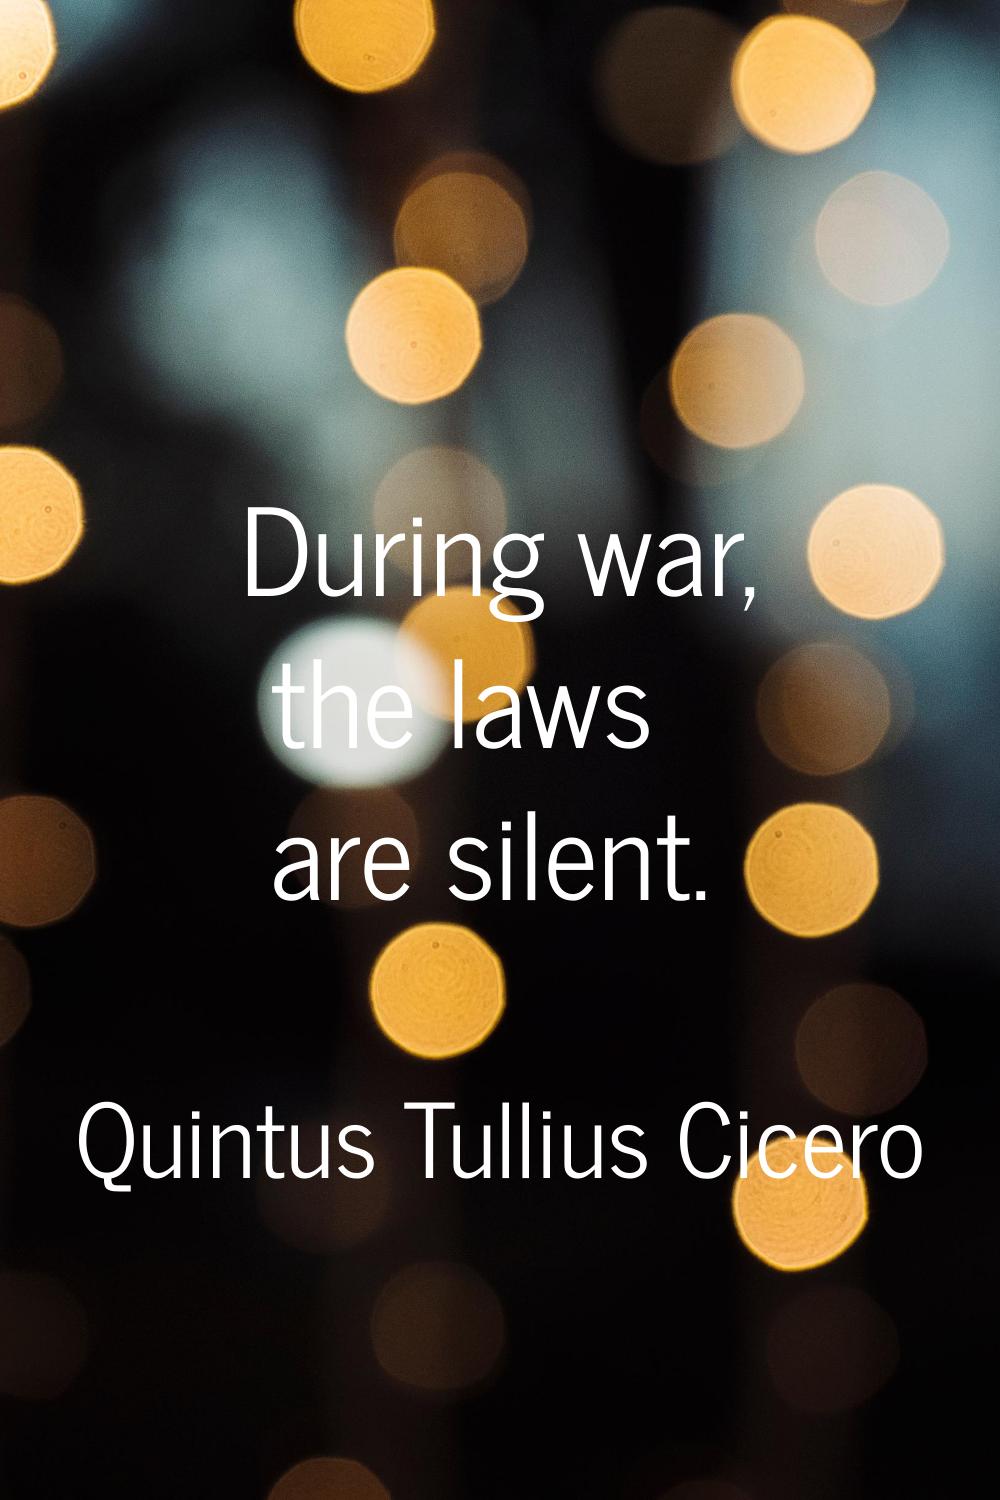 During war, the laws are silent.